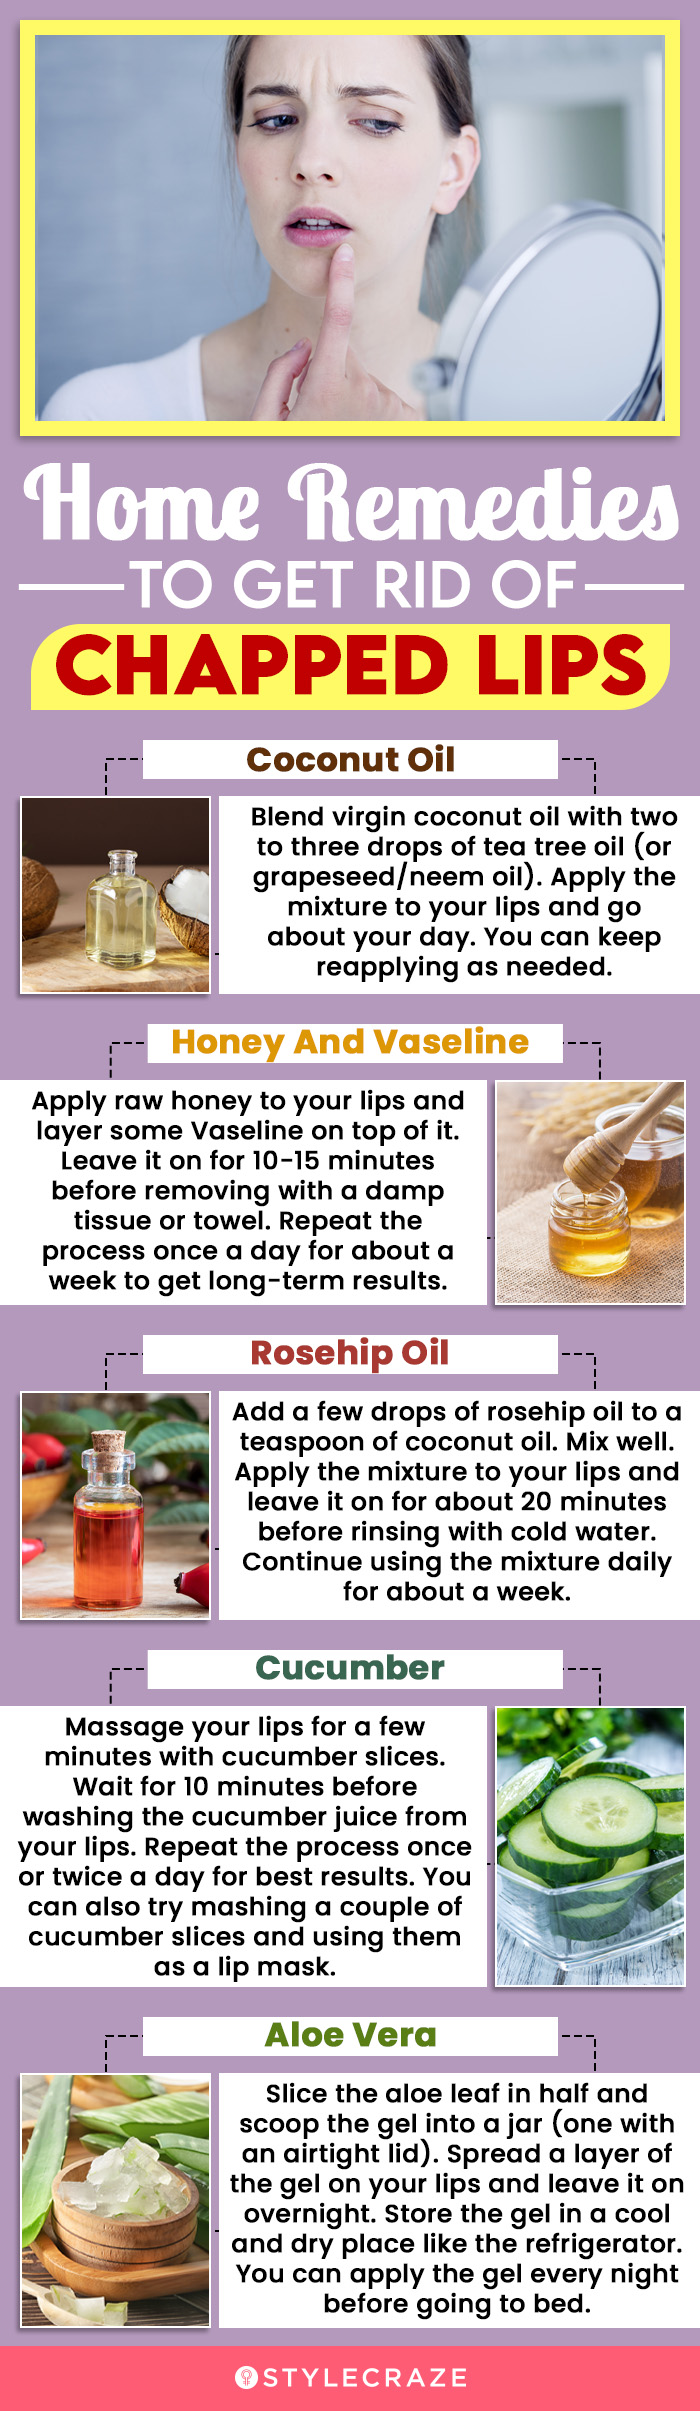 home remedies to get rid of chapped lips (infographic)